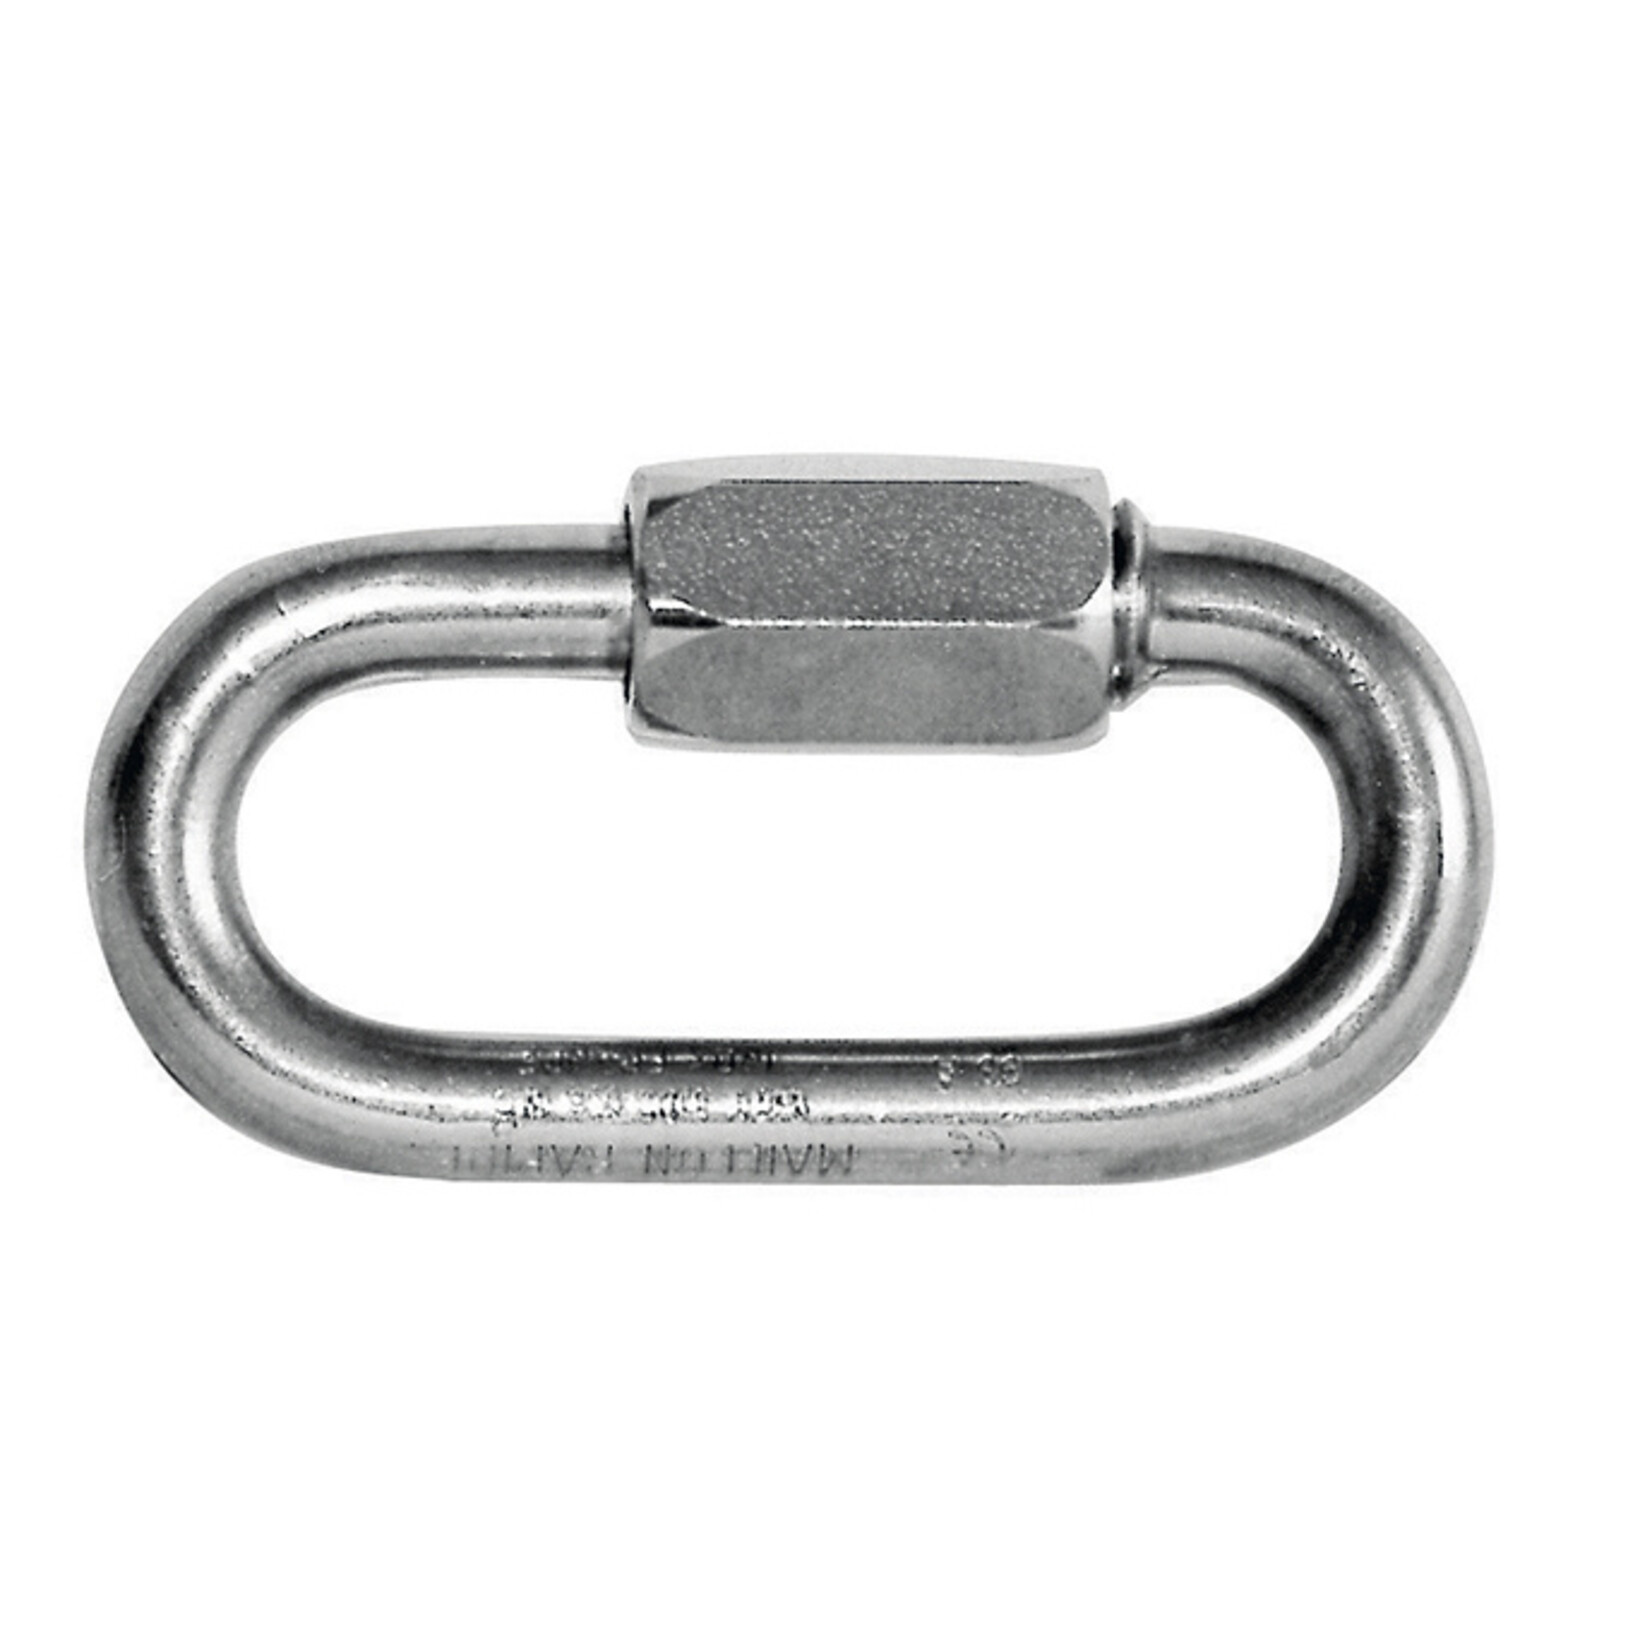 Plastimo Shackle expr galv links dia 12mm